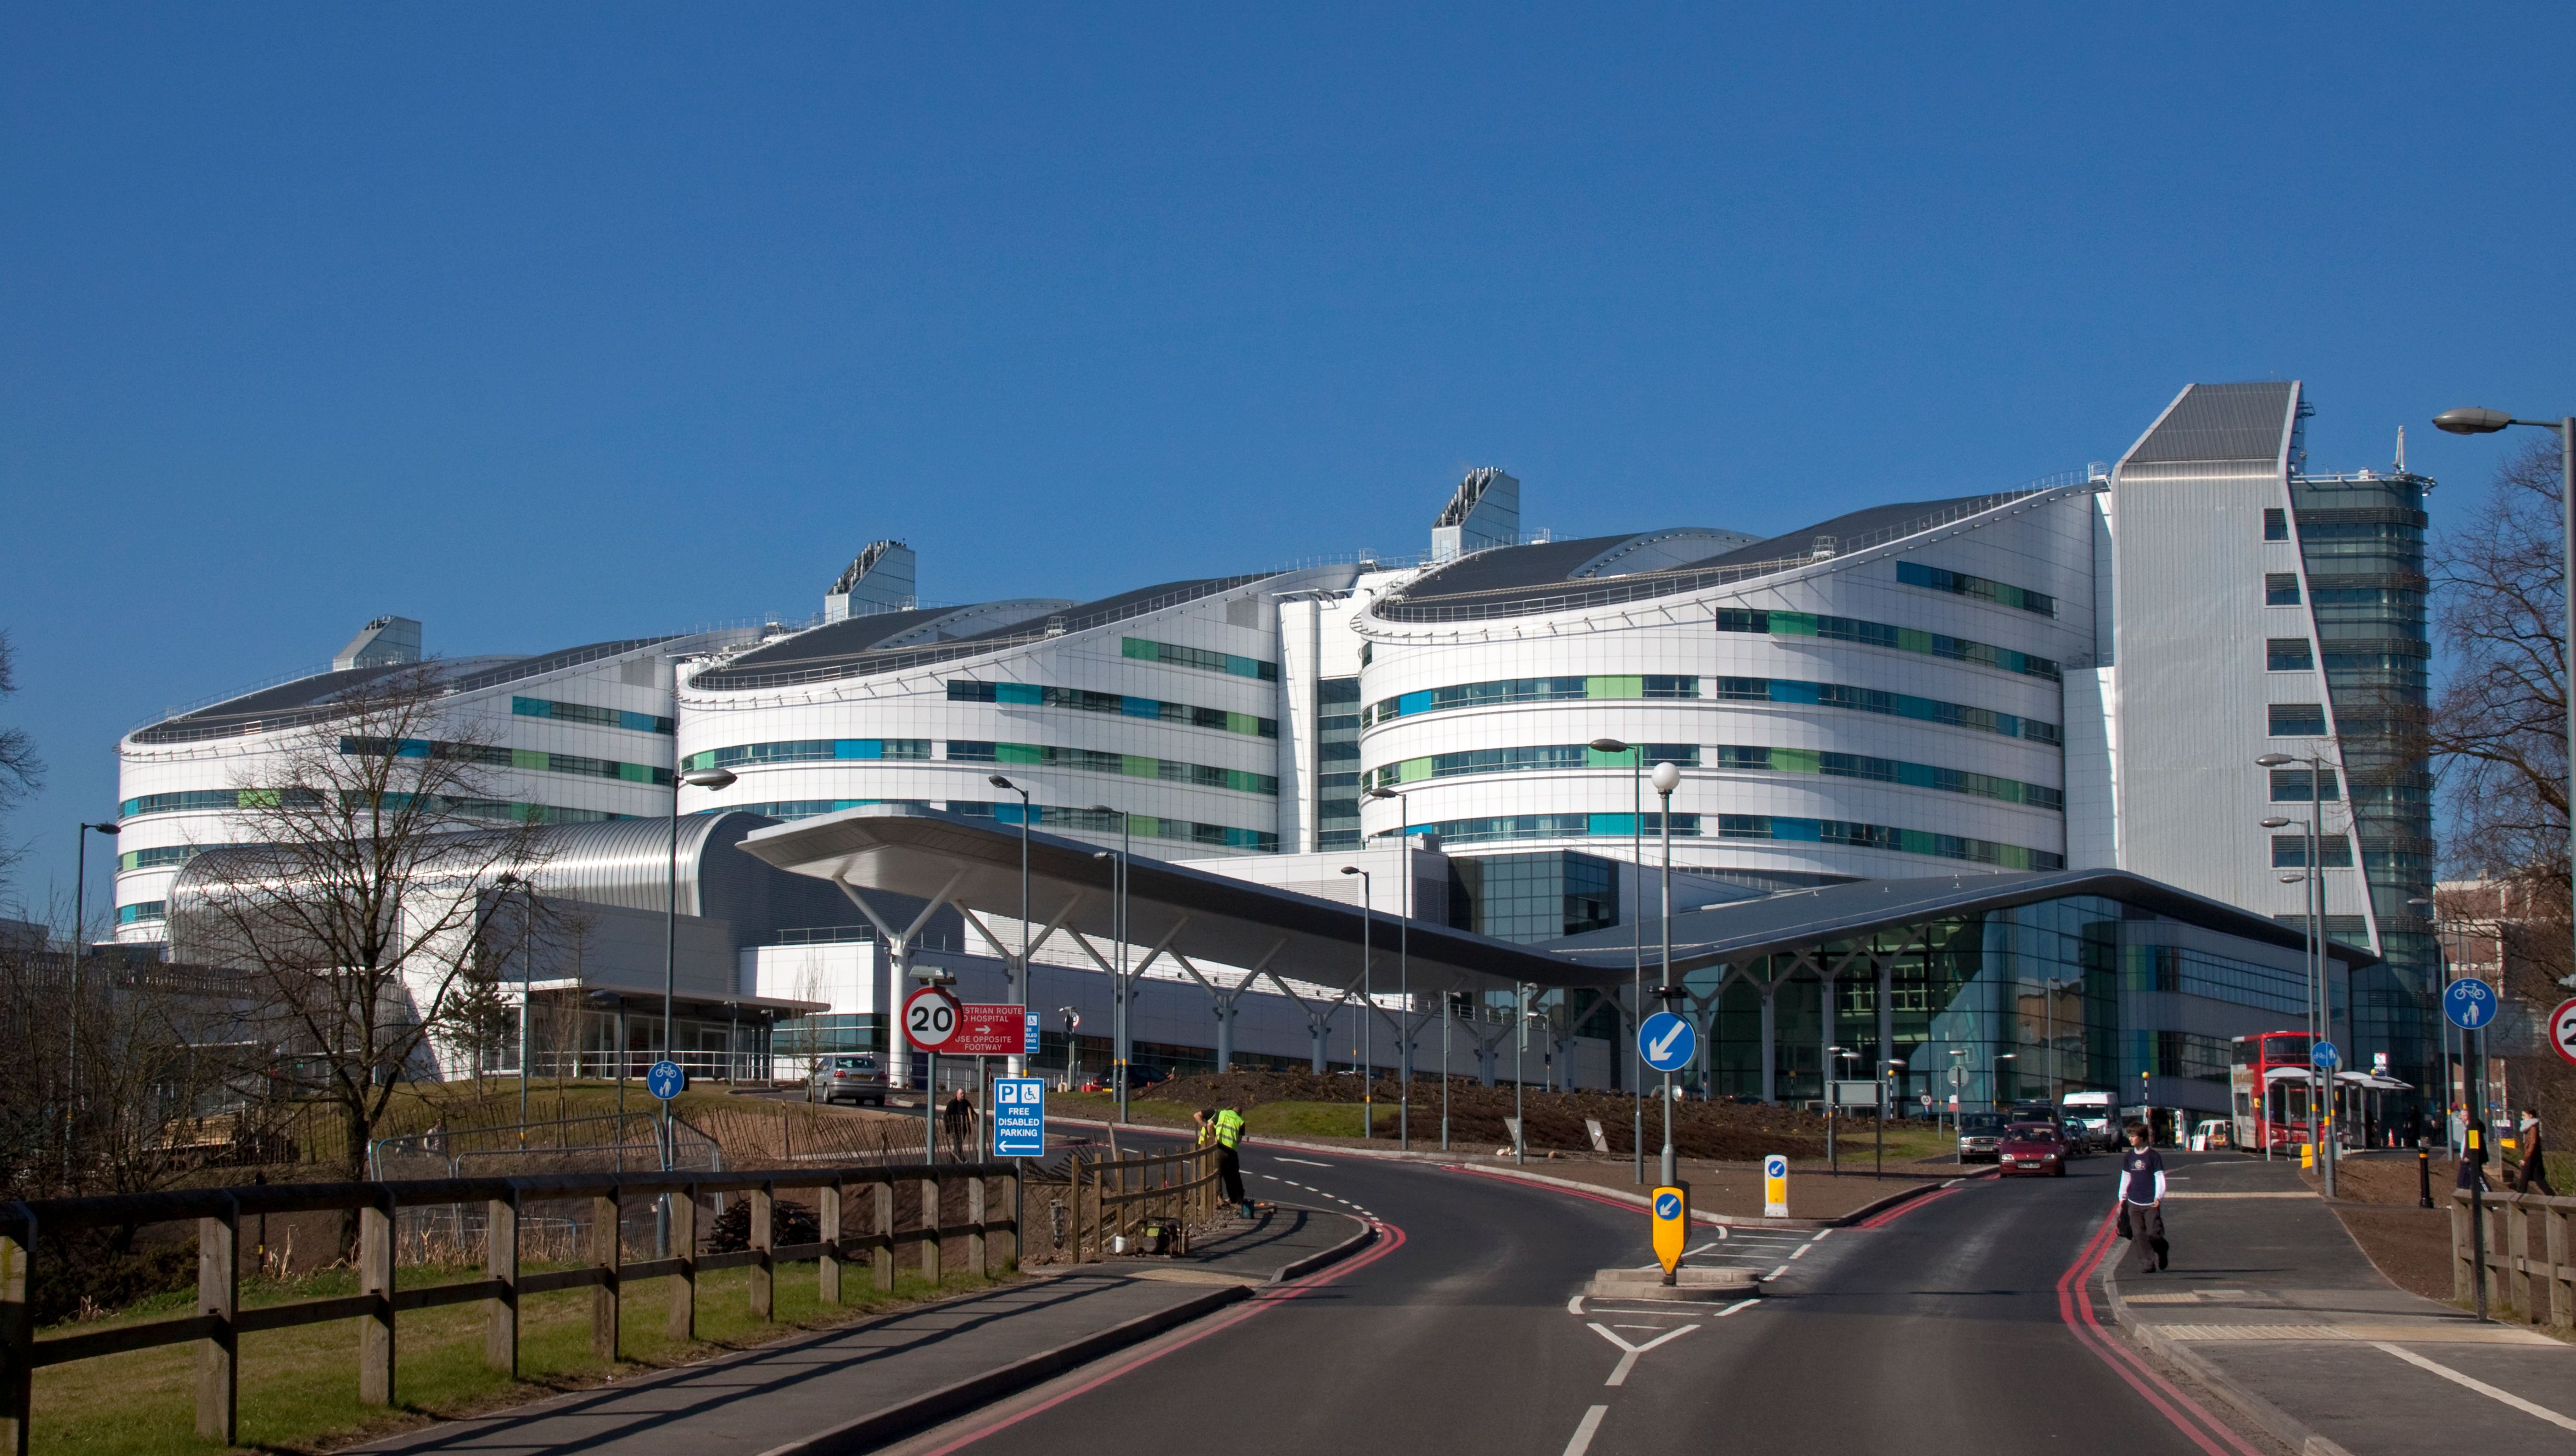 Why the QE Hospital Birmingham chooses CLIQ from Abloy UK